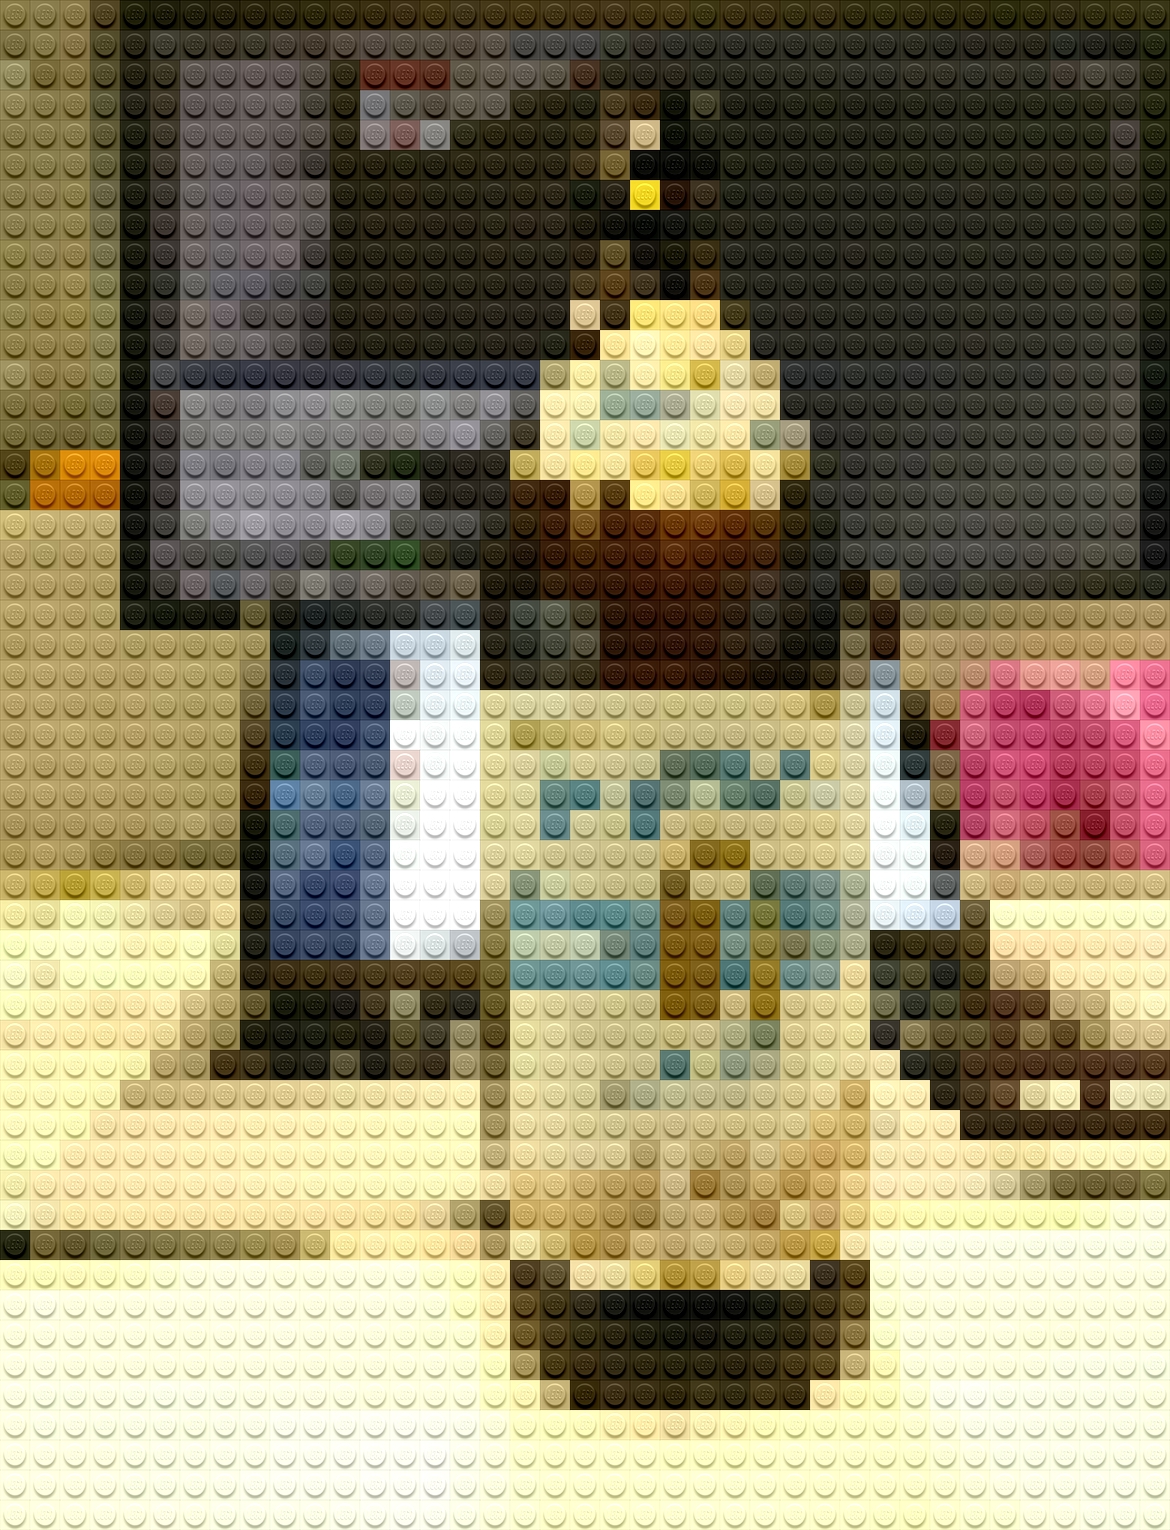 Image of a legofied beer